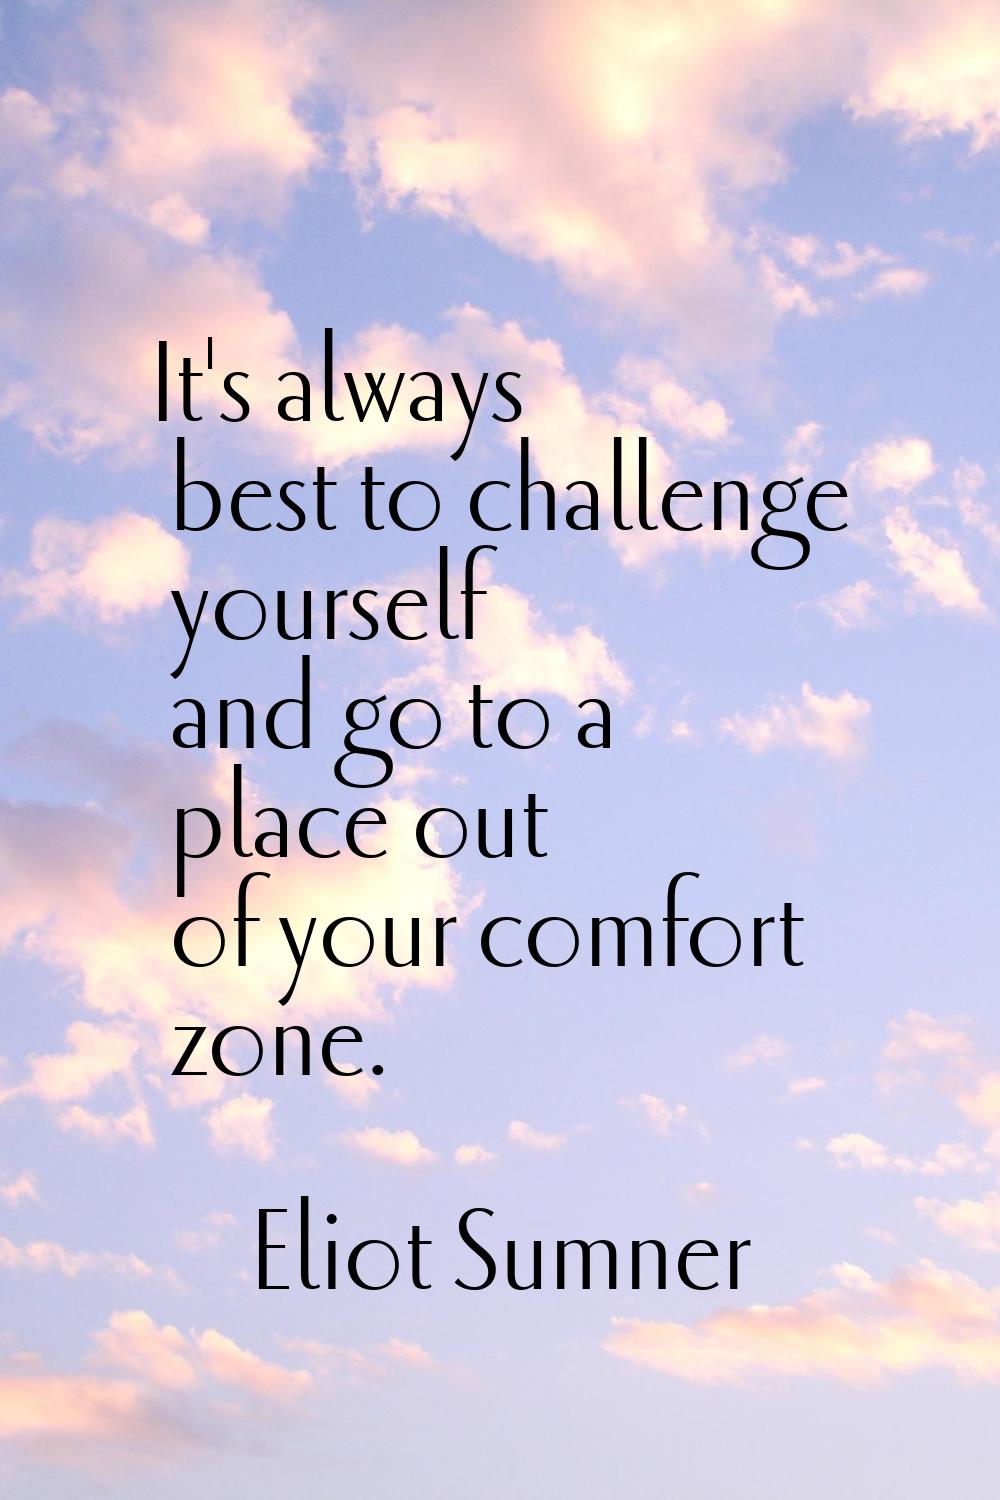 It's always best to challenge yourself and go to a place out of your comfort zone.